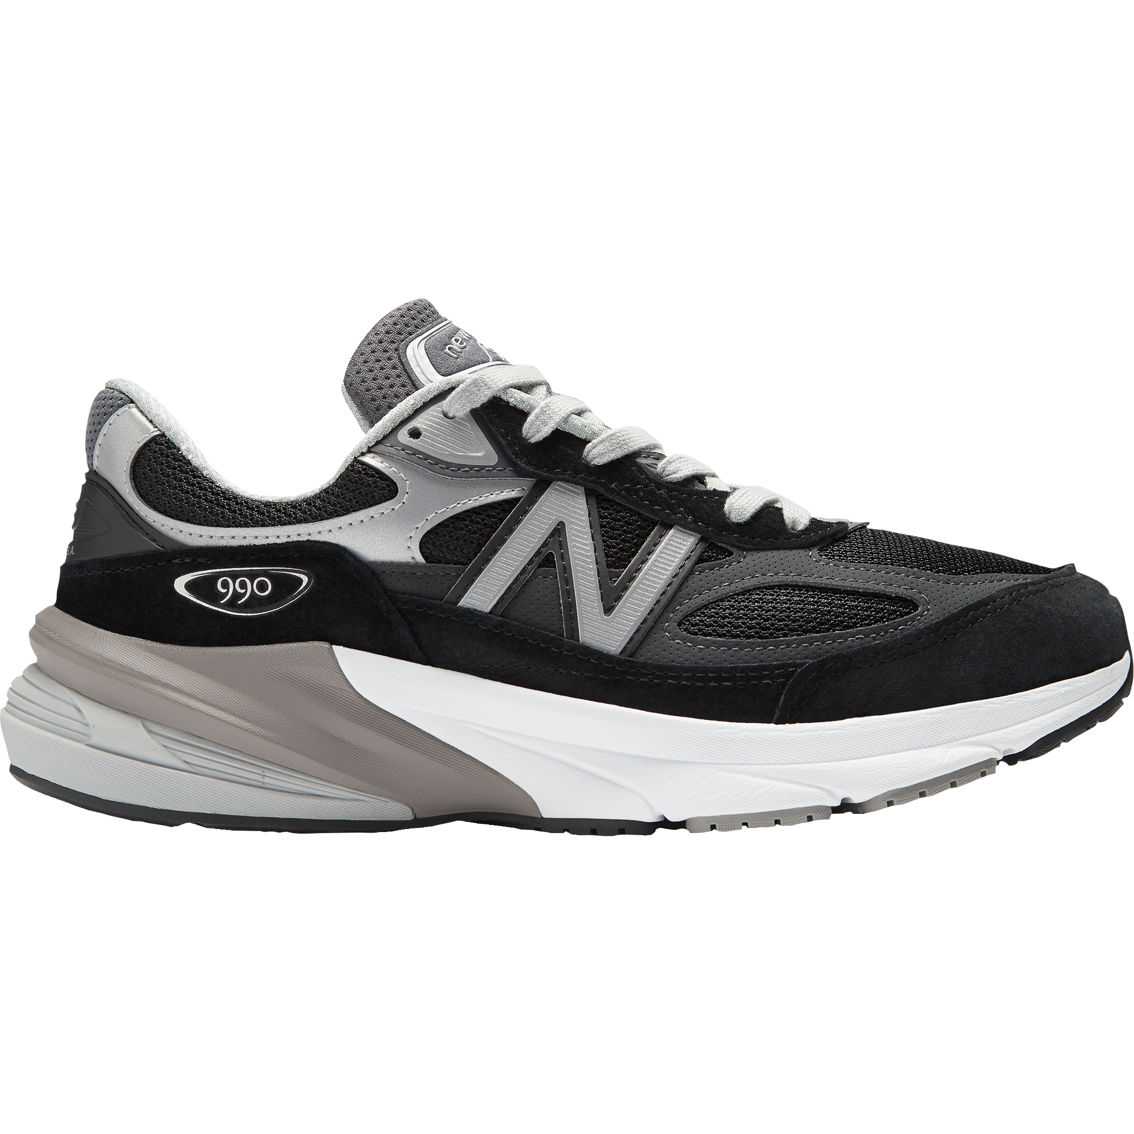 New Balance Made in USA 990v6 Running Shoes - Image 2 of 3